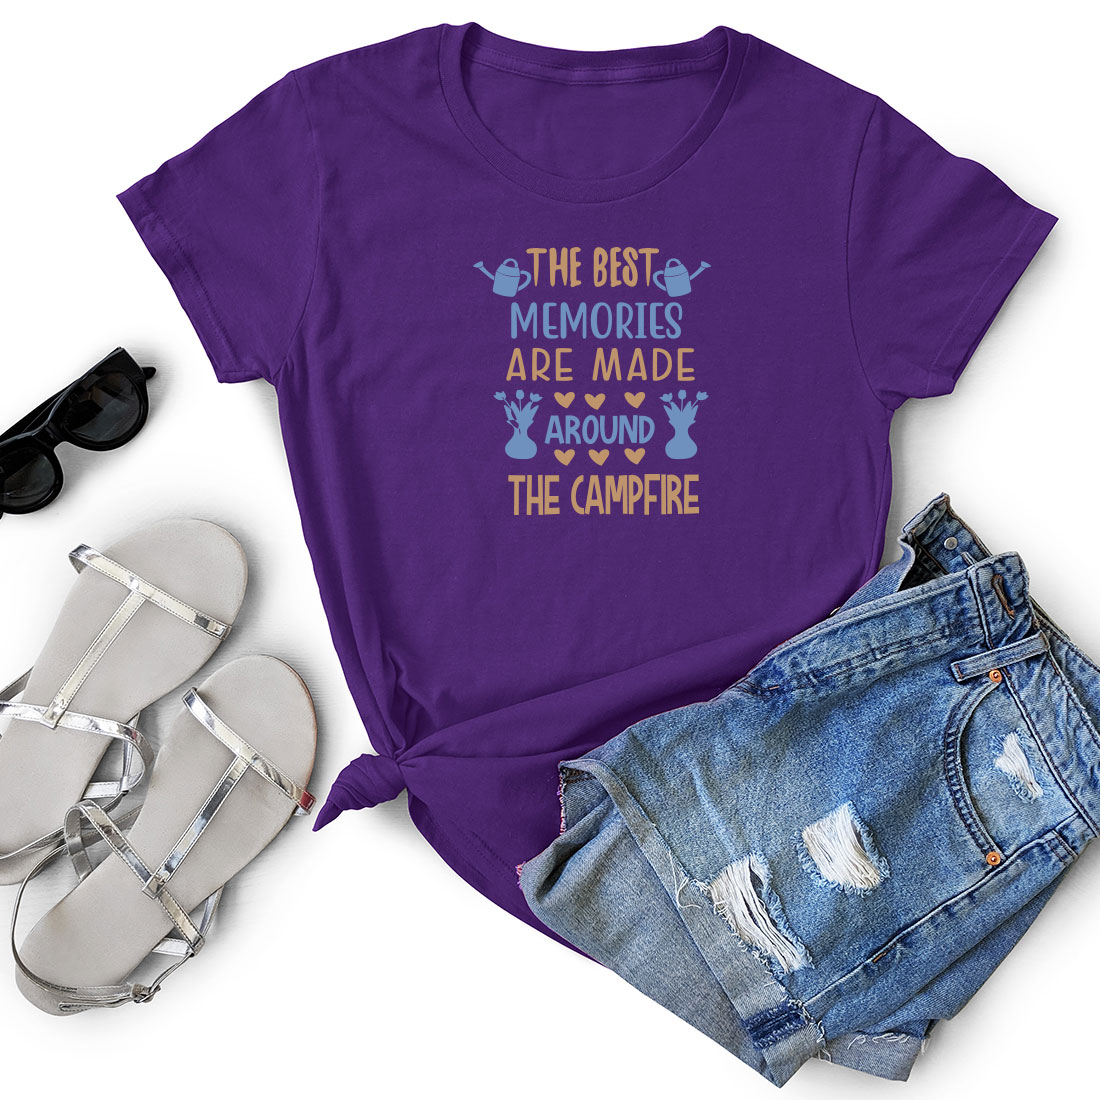 T - shirt that says the best memories are made around the campfire.